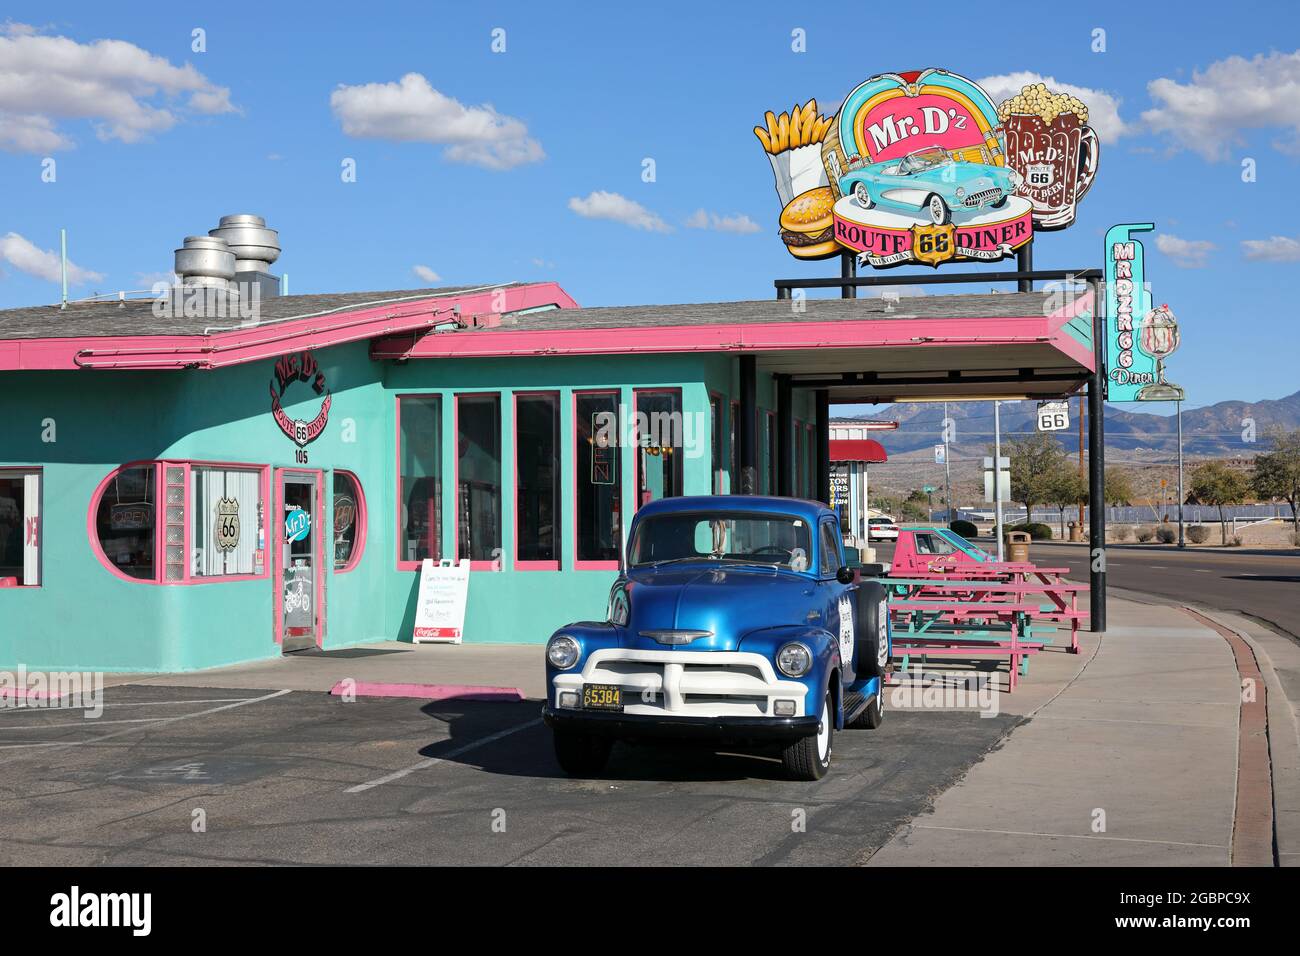 Geographie / Reisen, USA, Arizona, Kingman, Magnetresonanztomographie. D'z  Diner, Route 66, Kingman, ADDITIONAL-RIGHTS-CLEARANCE-INFO-NOT-AVAILABLE  Stockfotografie - Alamy